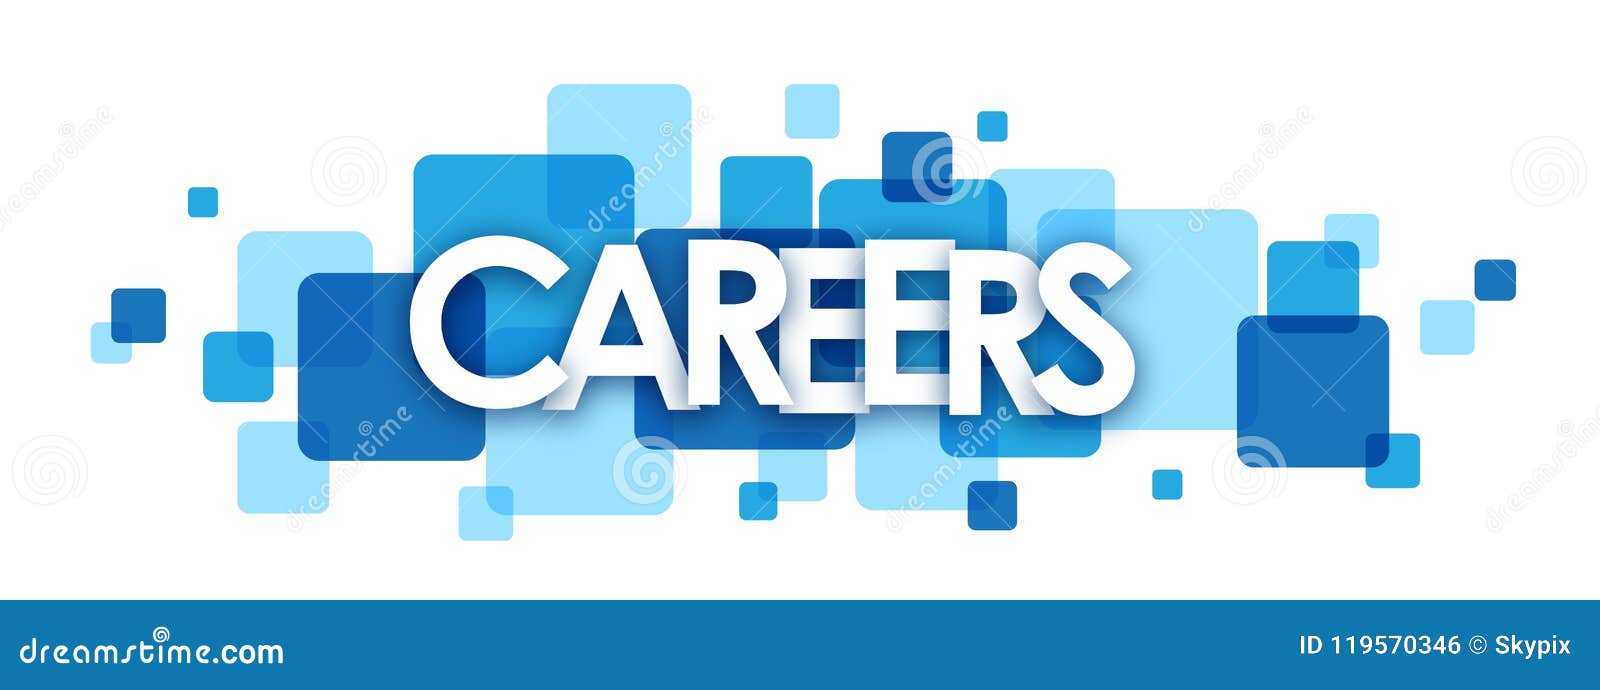 careers blue overlapping squares banner